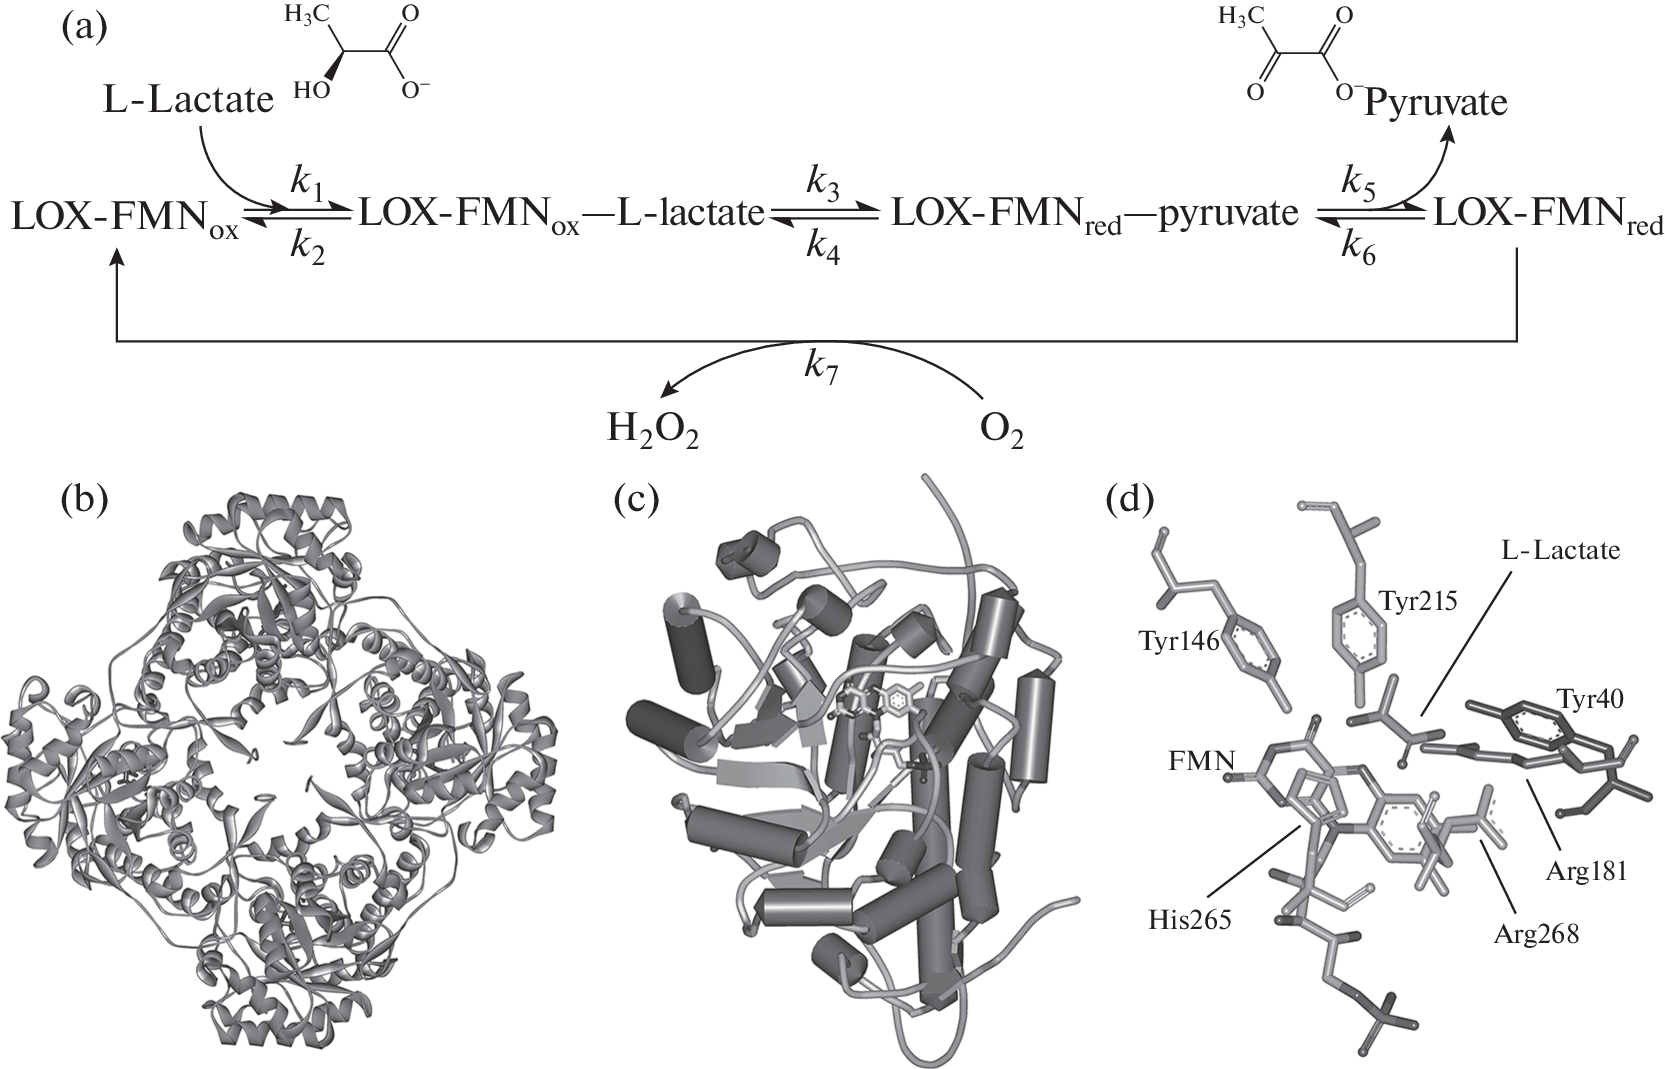 Protein Engineering of Lactate Oxidase